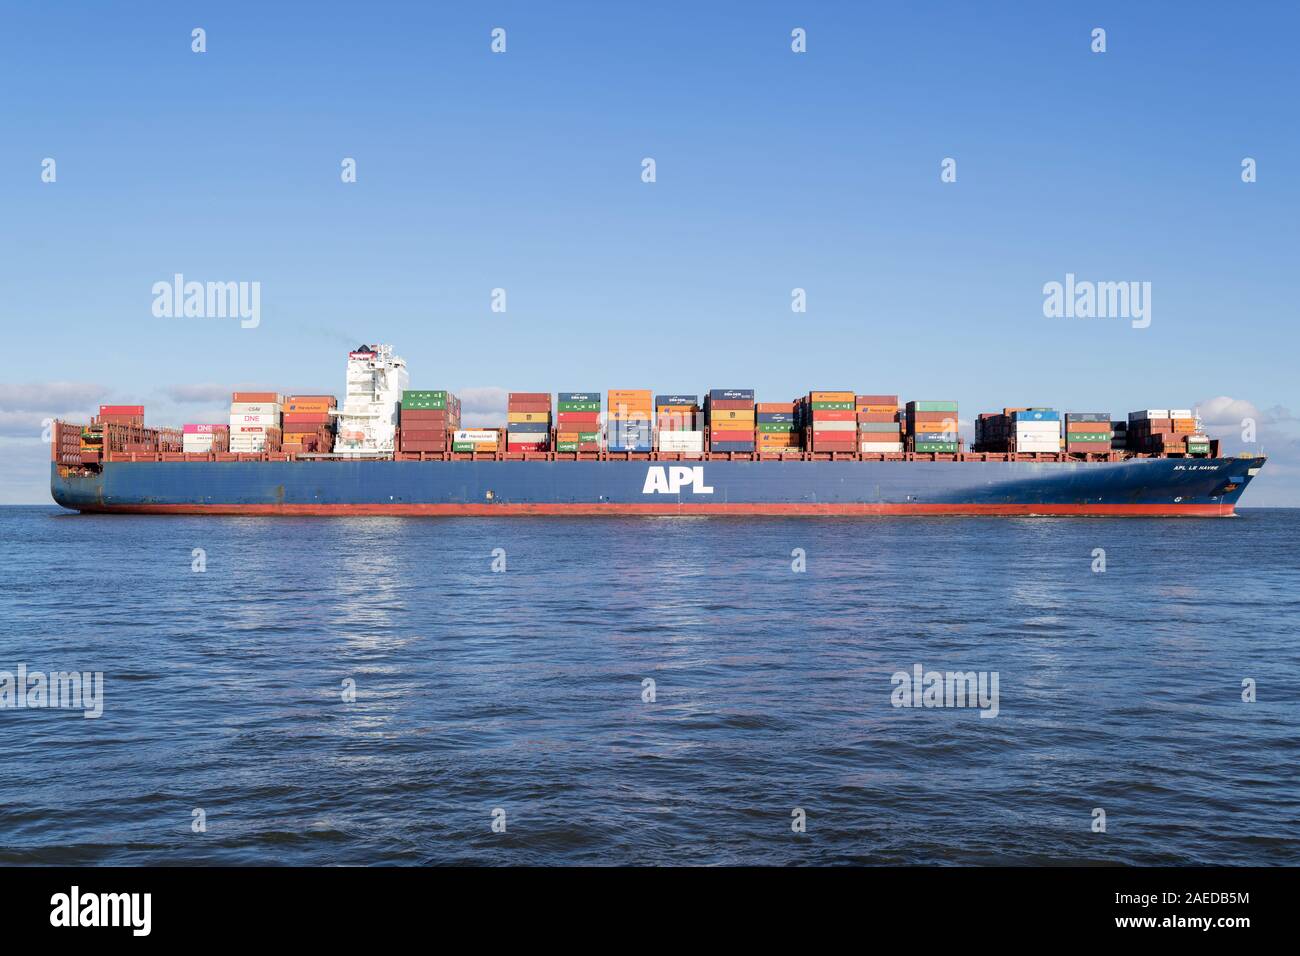 container ship APL LE HAVRE on the river Elbe Stock Photo